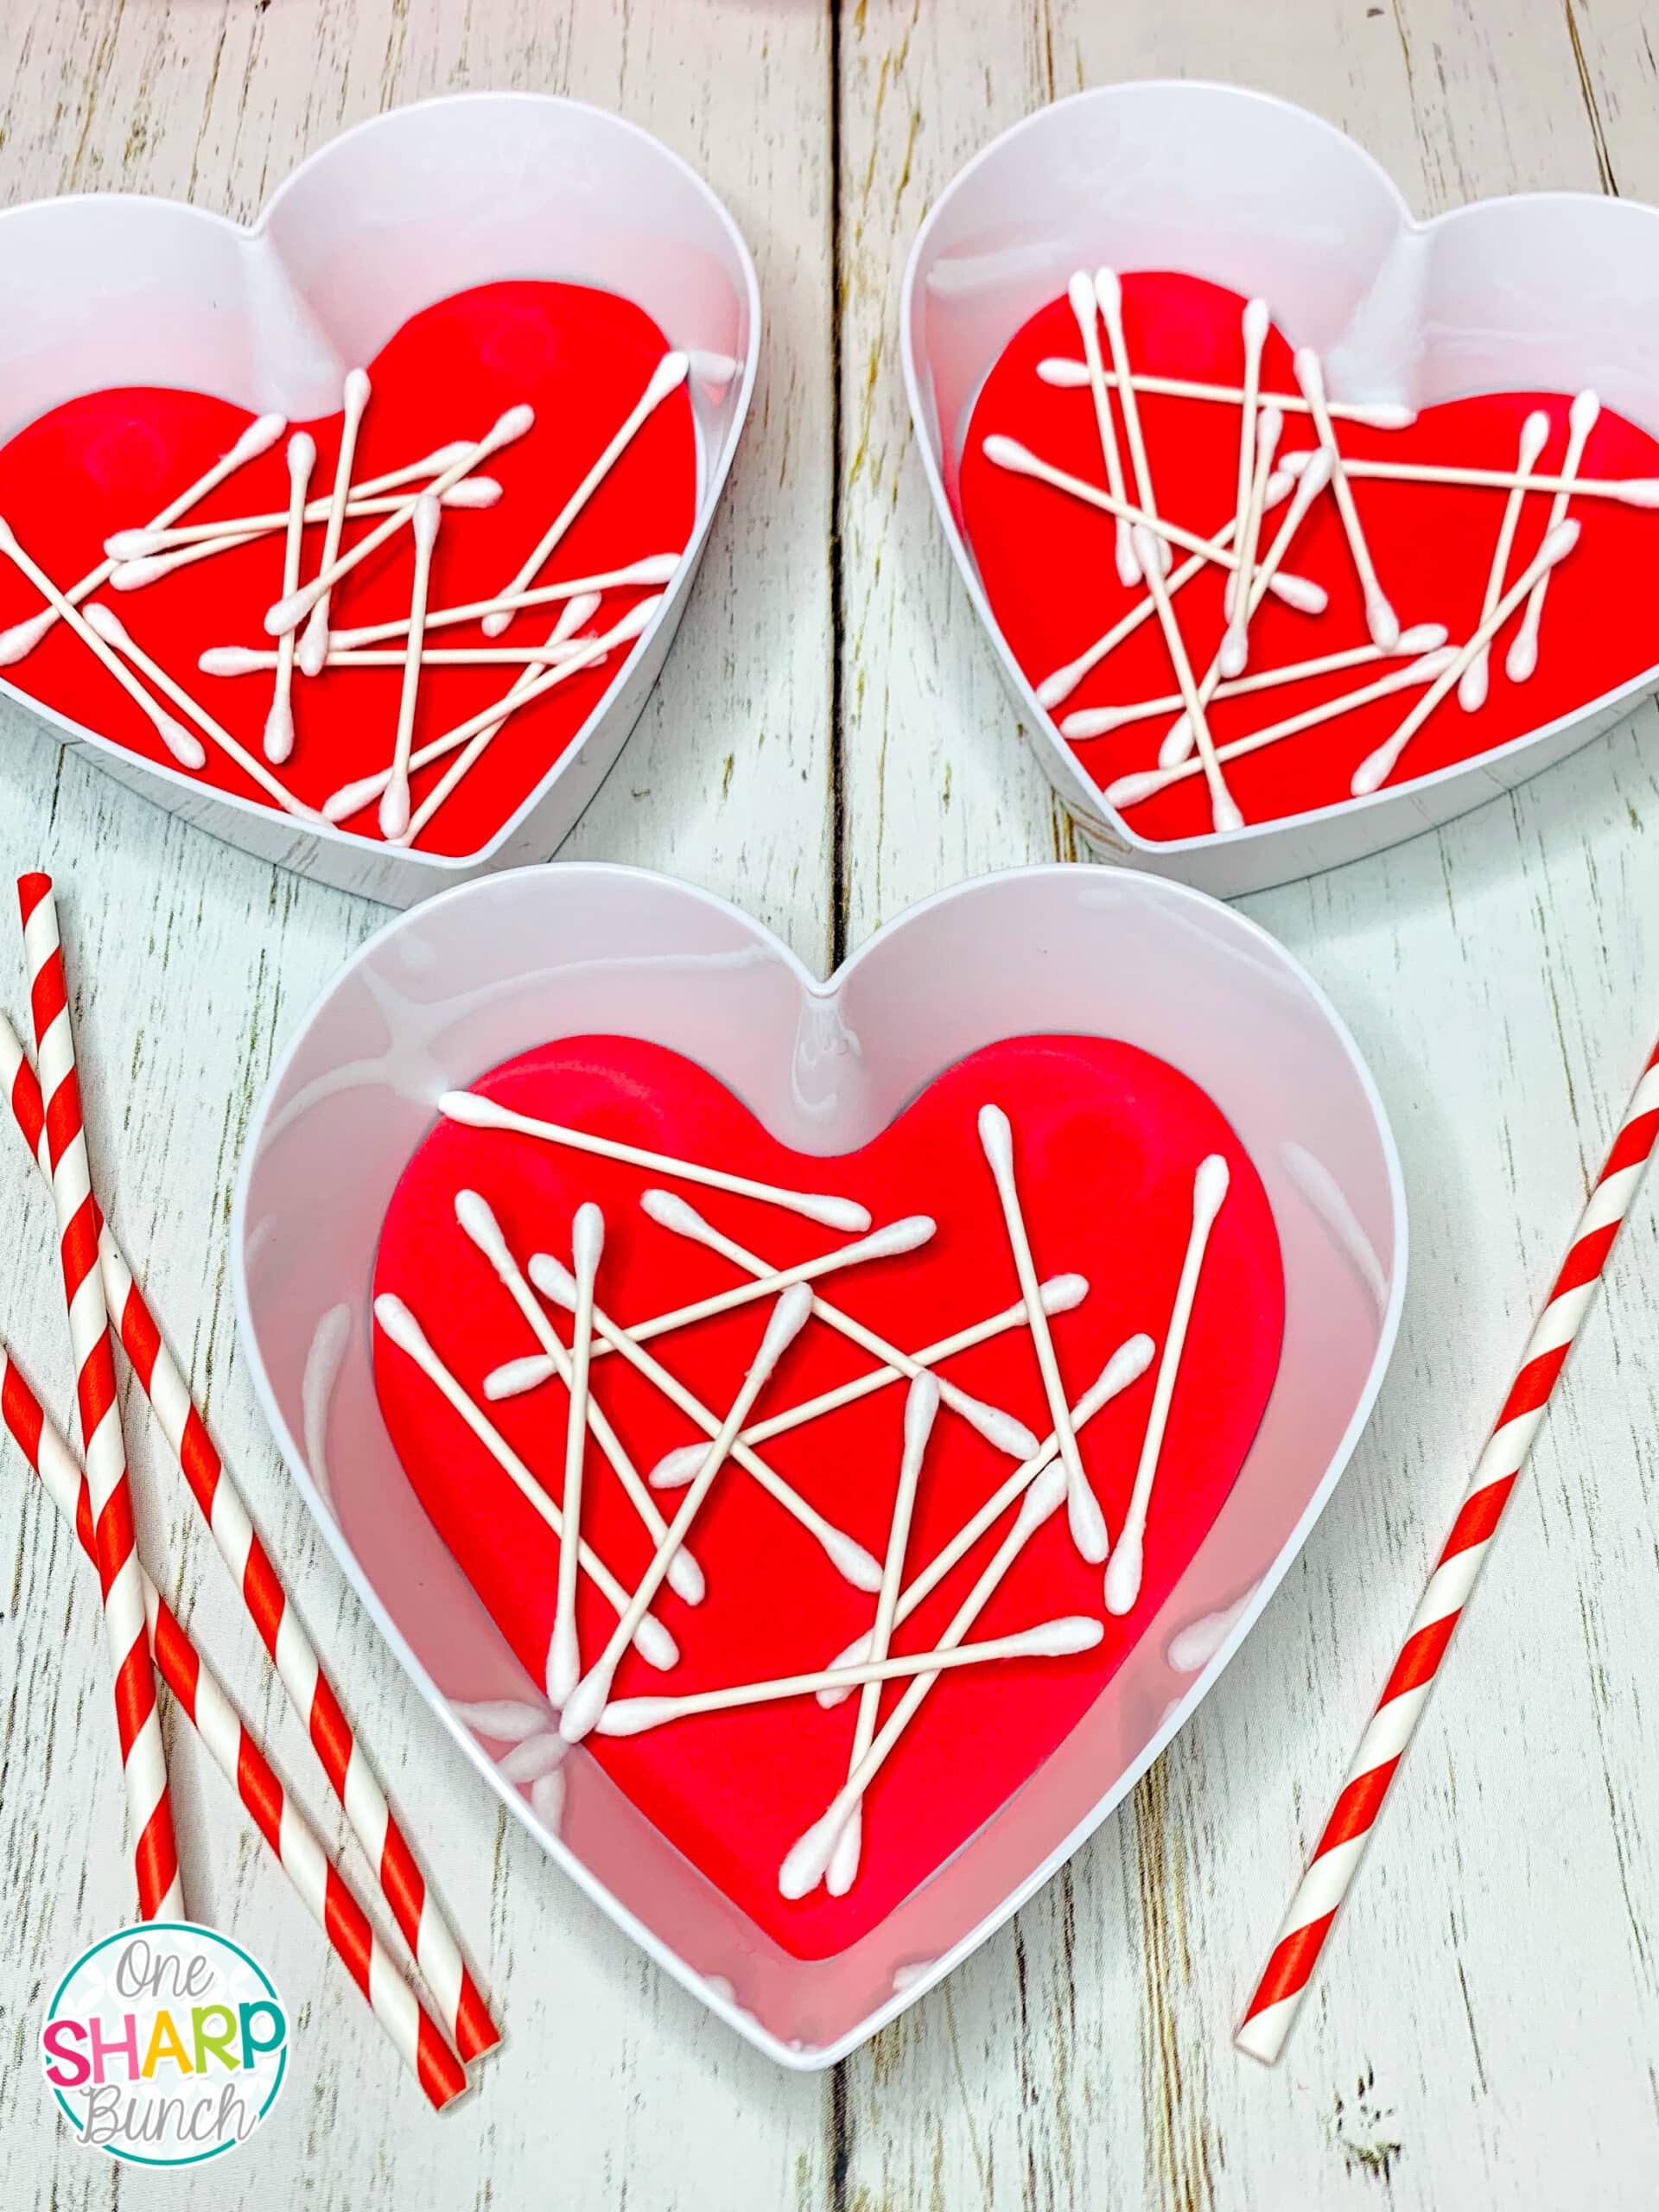 Easily plan the ultimate classroom Valentine’s Day party with these Valentine’s Day games, Valentine’s Day activities and Valentine’s Day crafts for Preschool, Kindergarten, 1st Grade and 2nd Grade. Throwing a classroom party can be quite stressful, so here are my top 10 Valentine's Day Party ideas and tips to help make your party run smoothly!